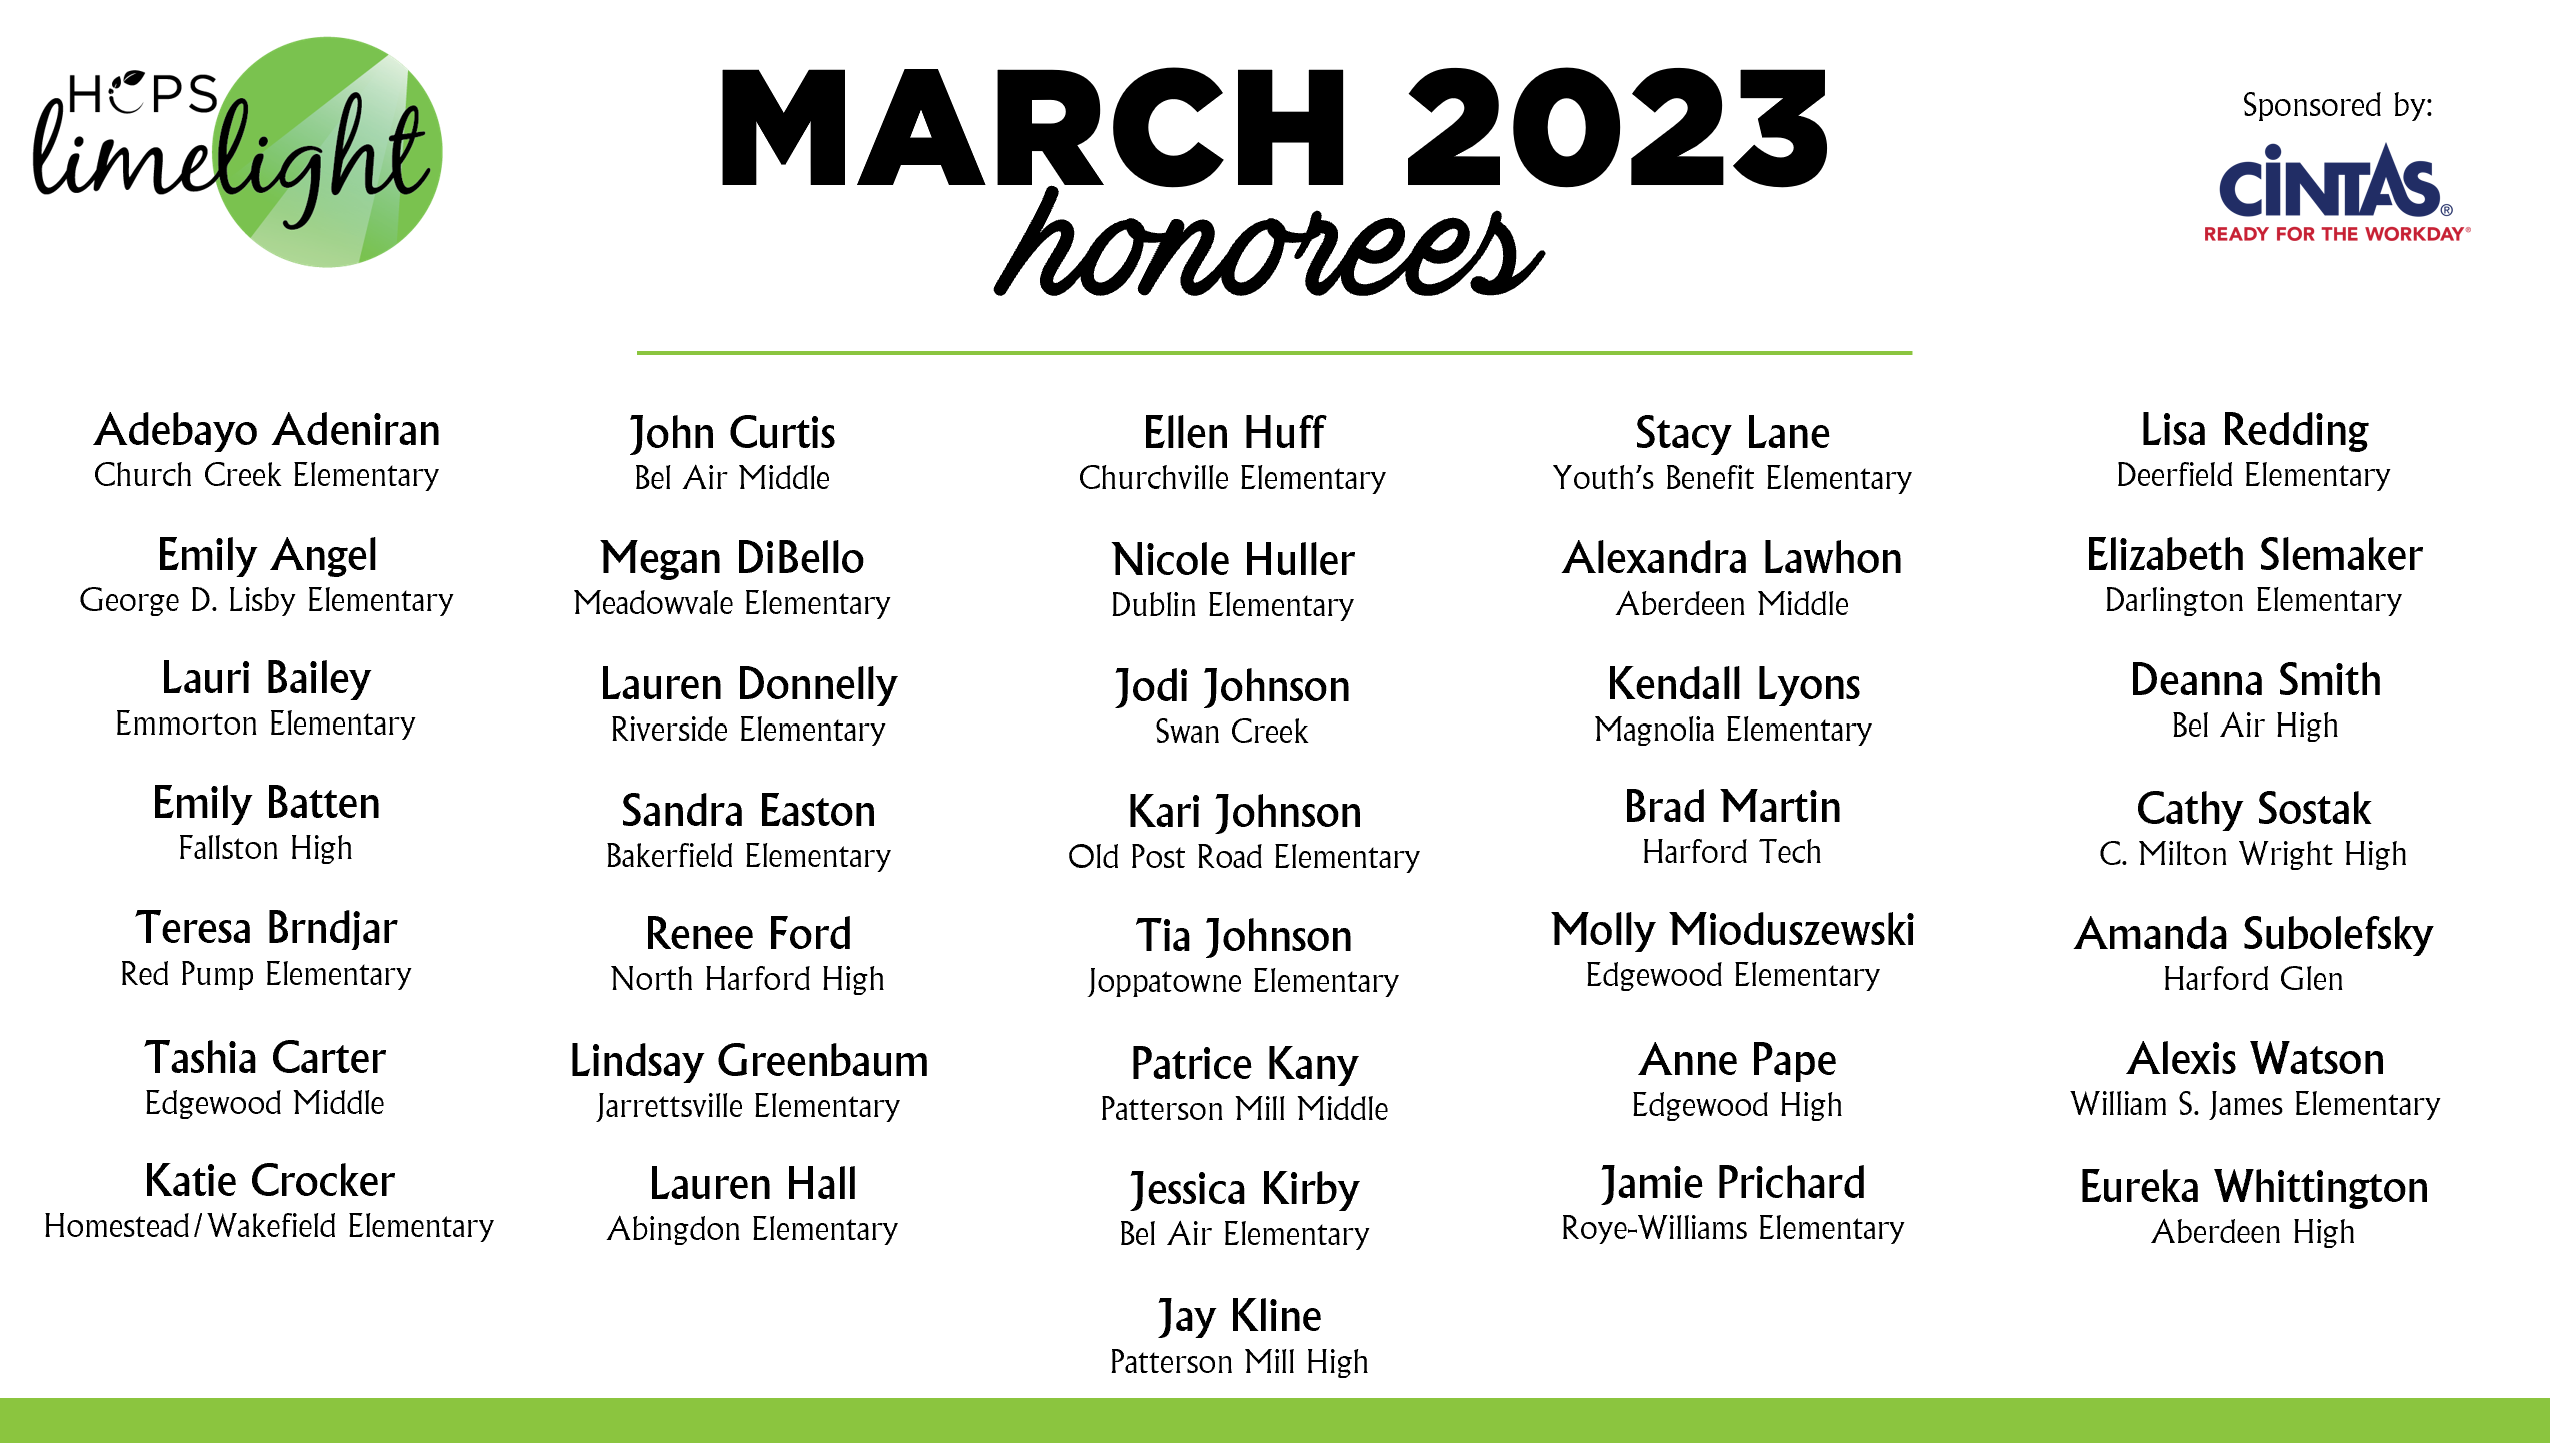 HCPS Limelight Honorees - March 2023